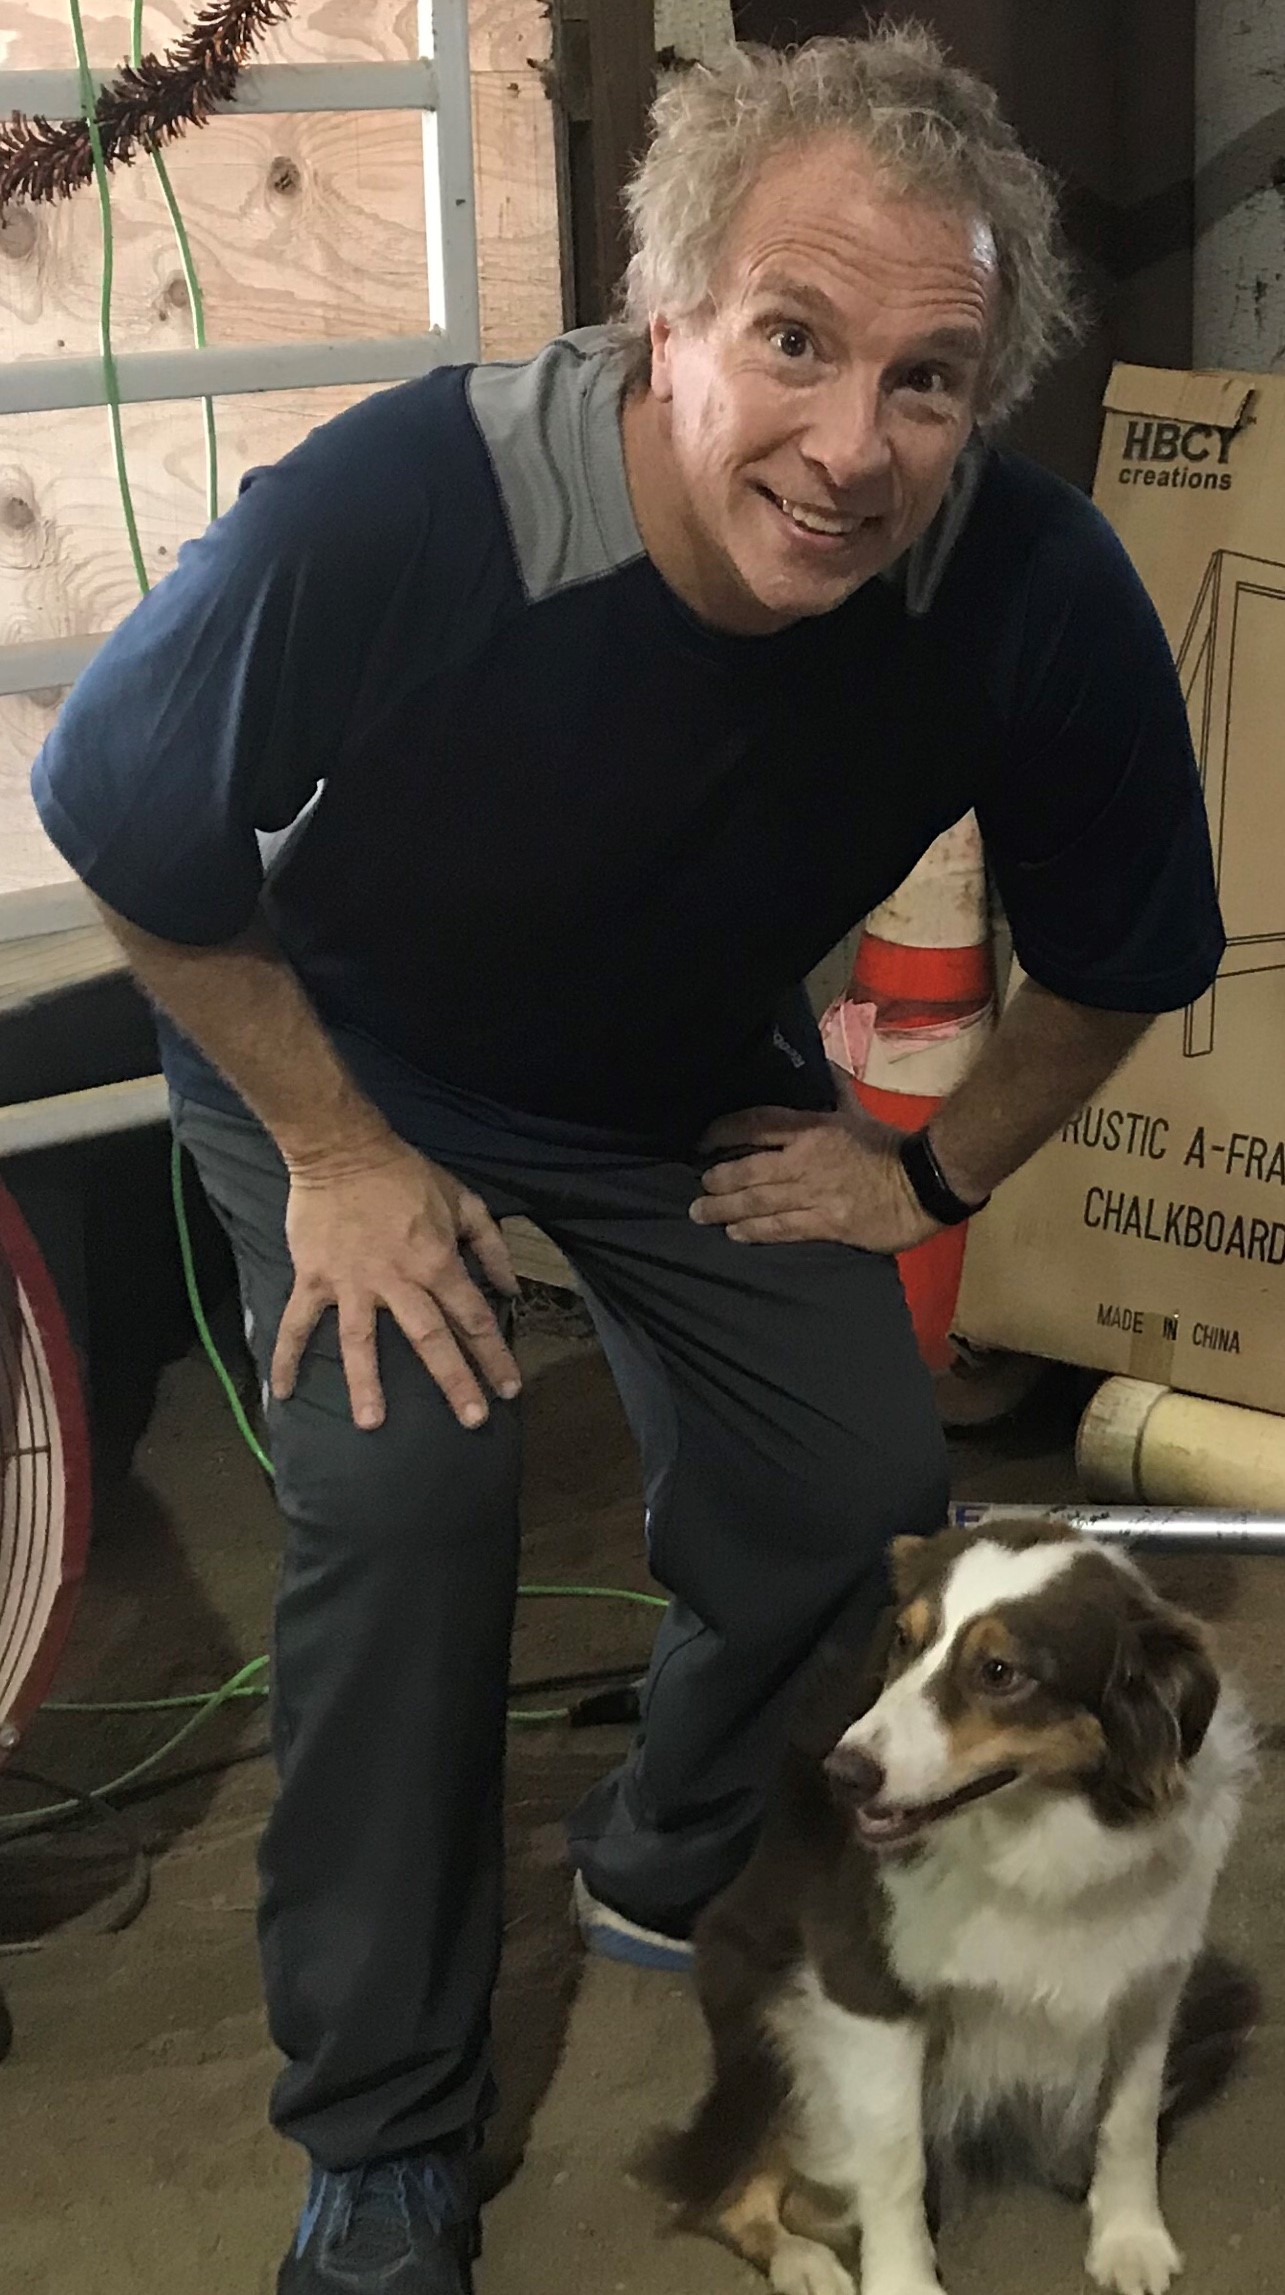 man poses with dog